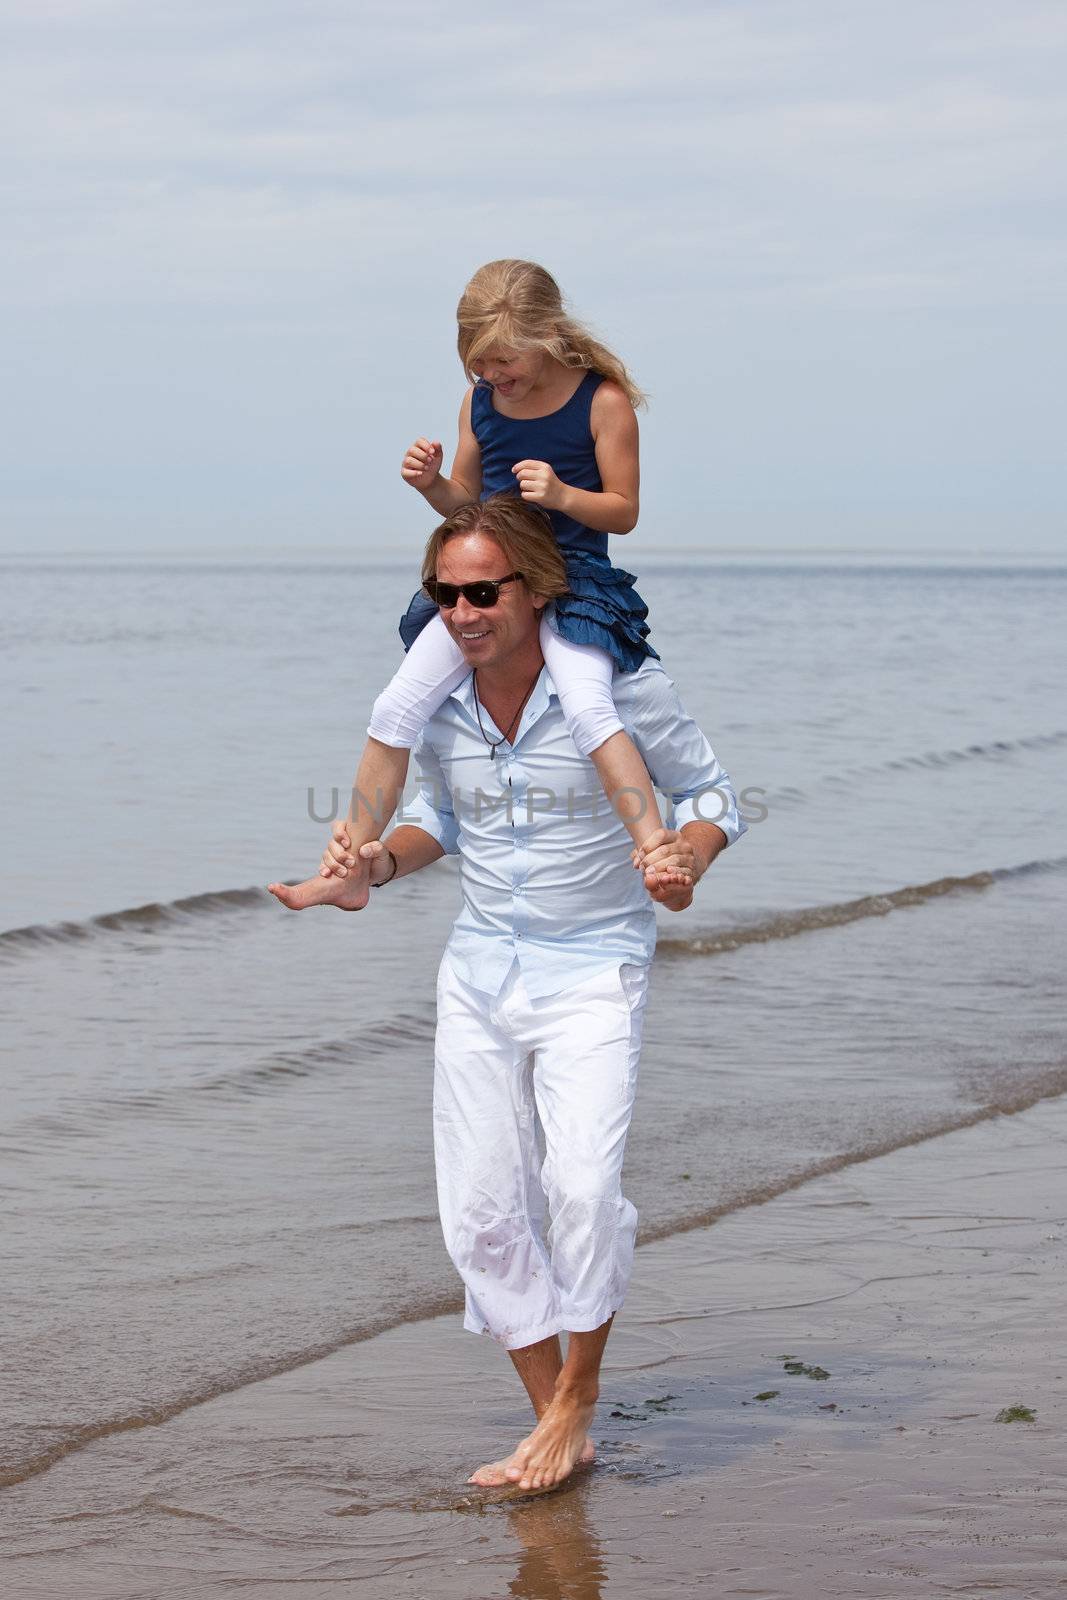 Cute young girl sitting on dad's shoulders playing in the surf